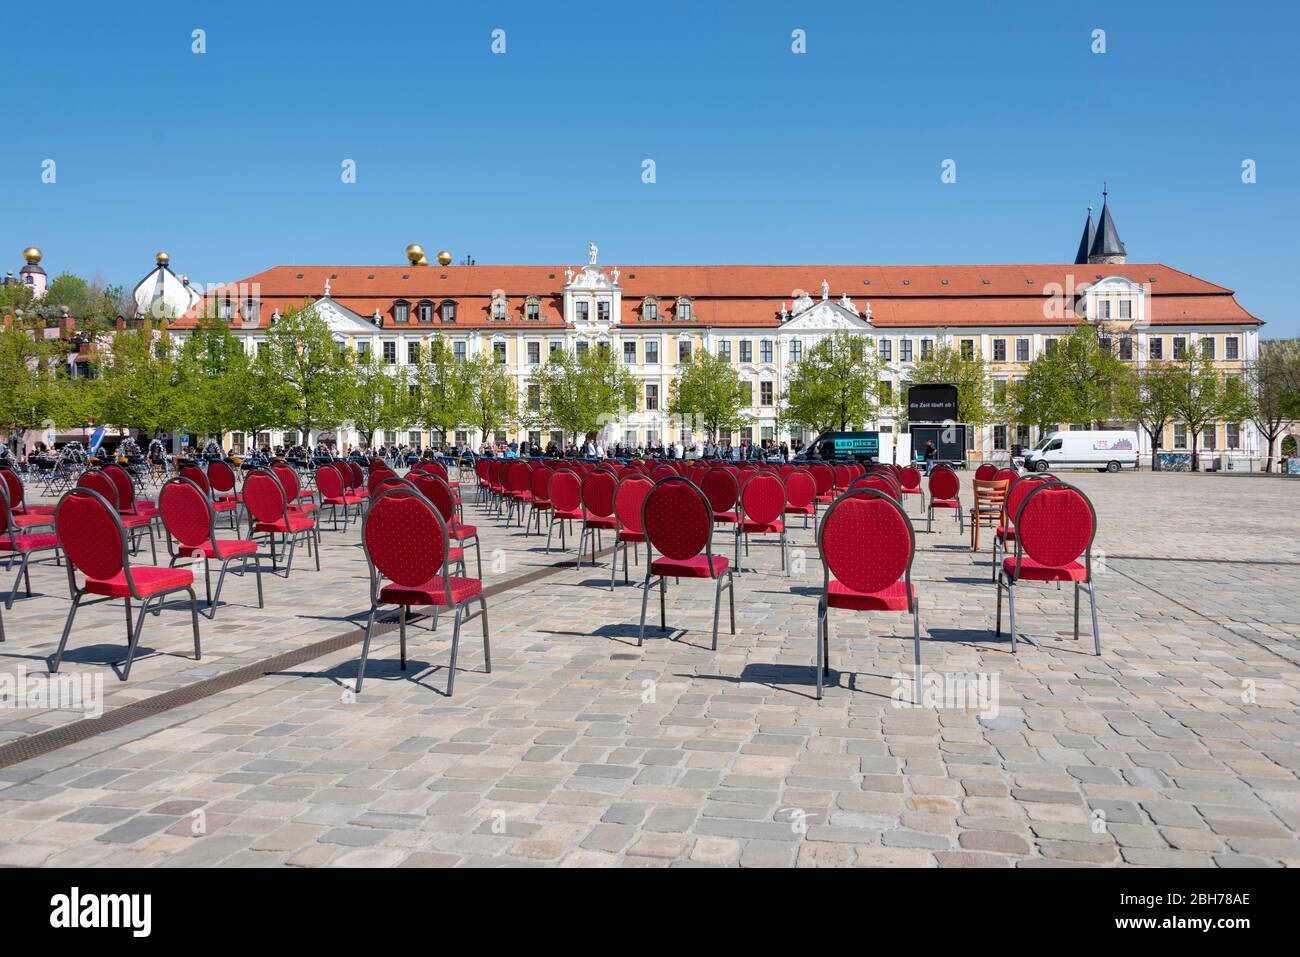 Germany, Magdeburg, April 24, 2020: In Magdeburg, restaurant owners have set up 1000 chairs on the cathedral square. They are protesting against the shutdown. The Corona crisis threatens the death of pubs and restaurants in Germany. Credit: Mattis Kaminer/Alamy Live News Stock Photo